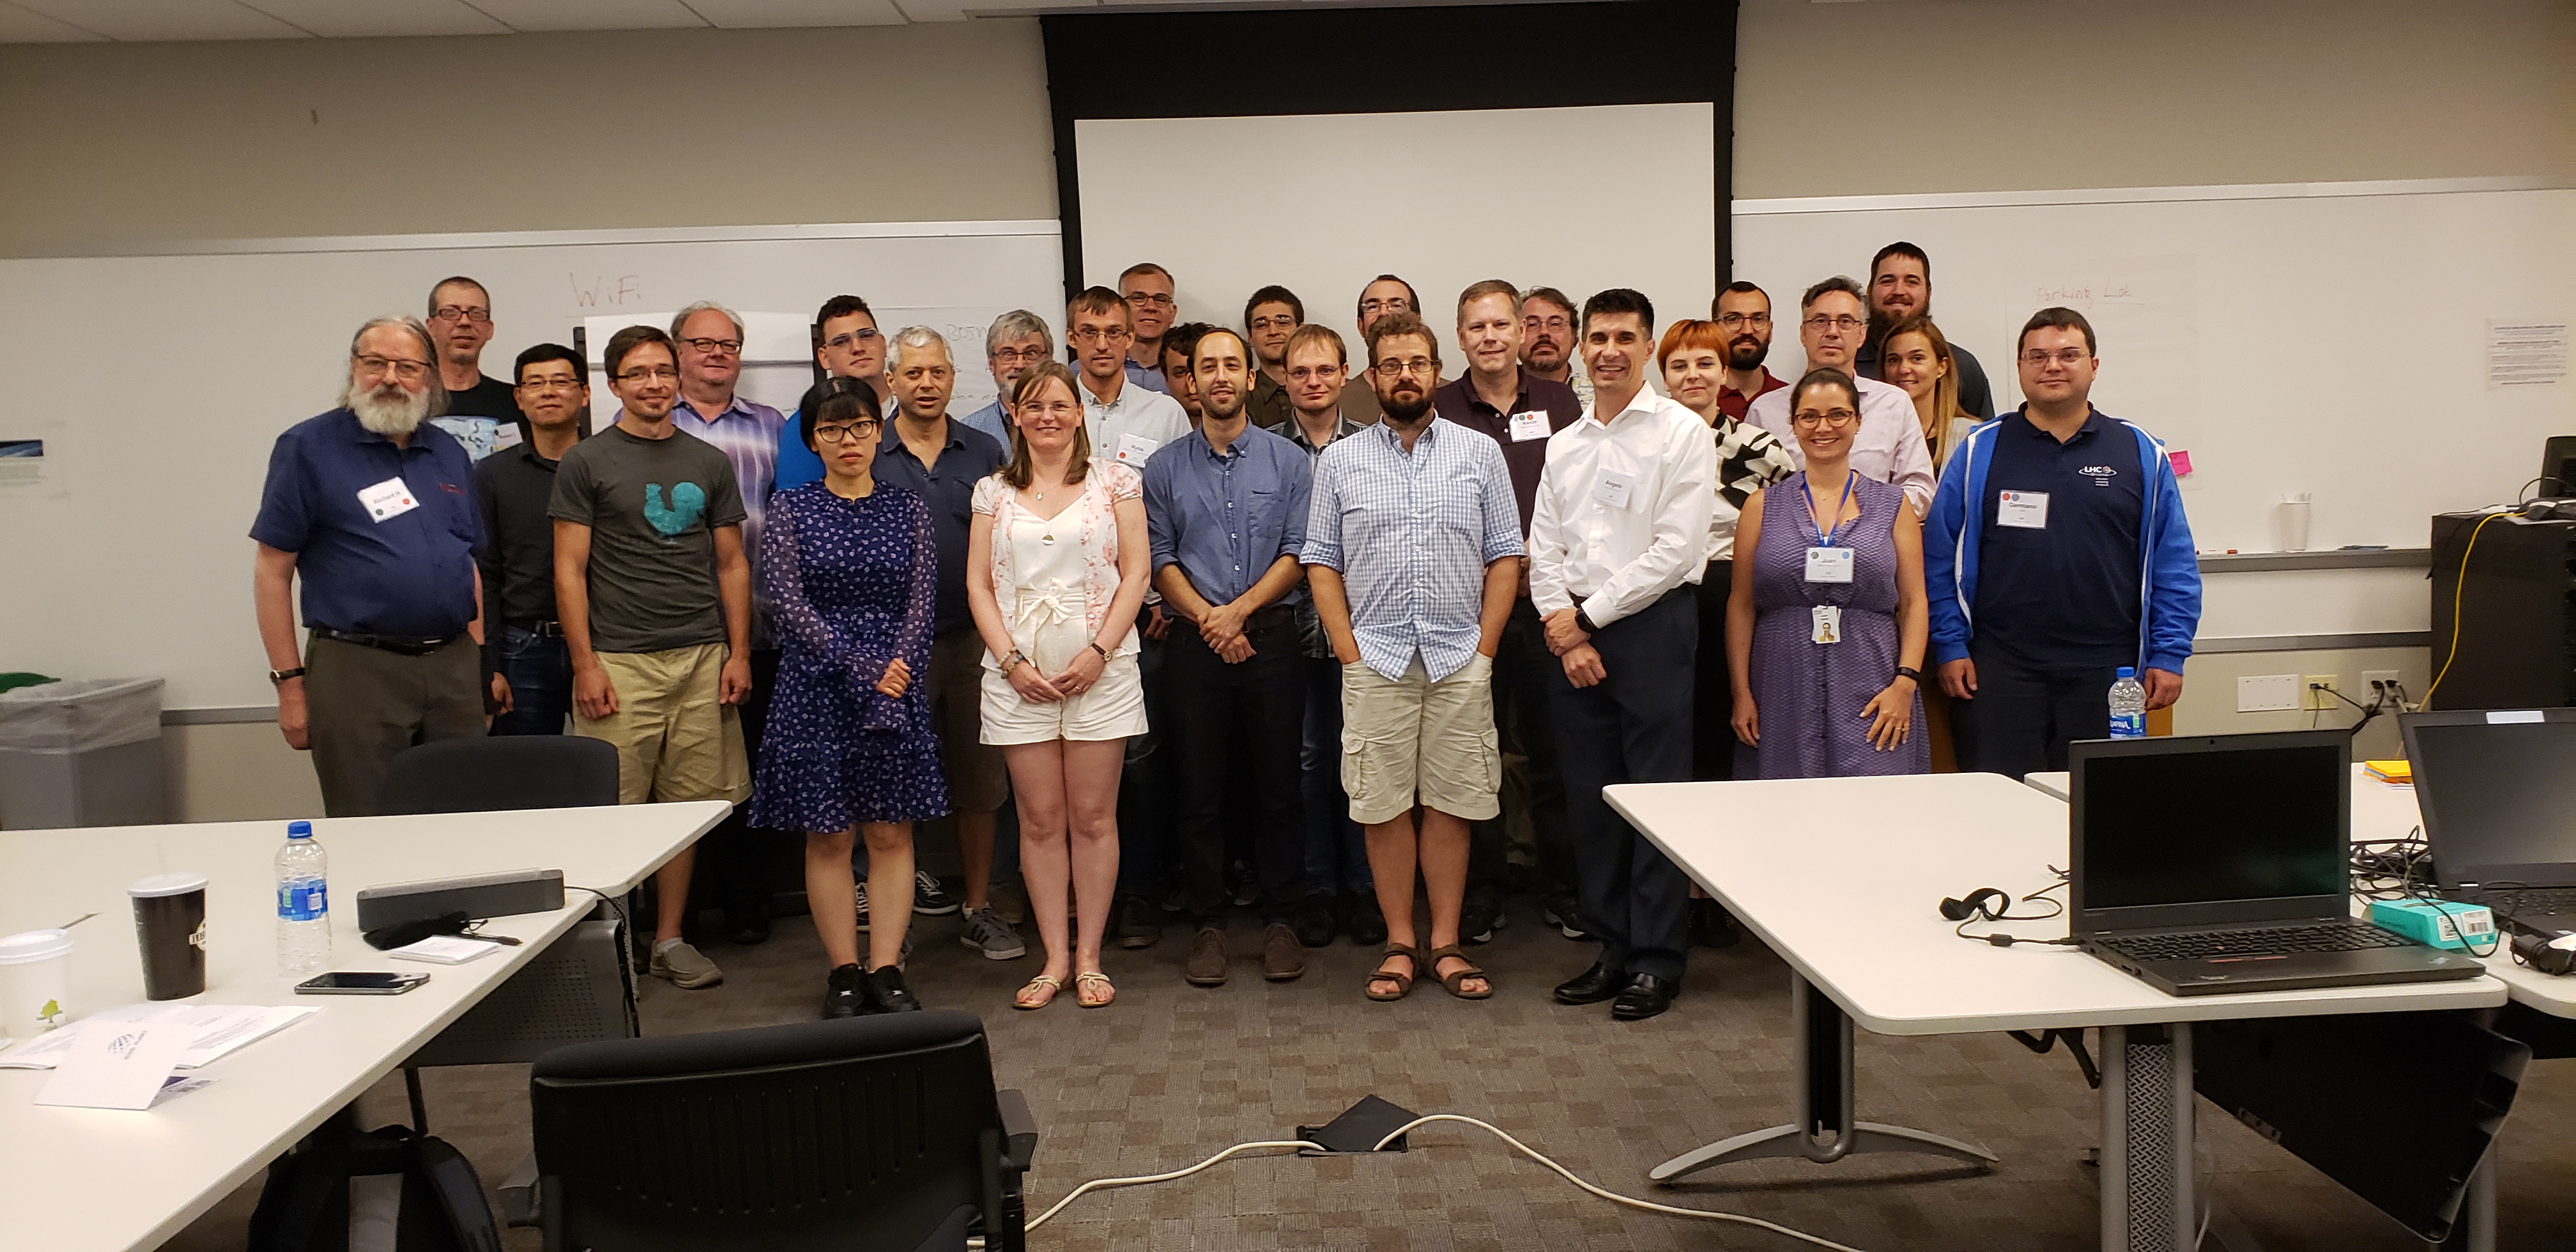 Attendees of the 2019 BOINC Workshop 2